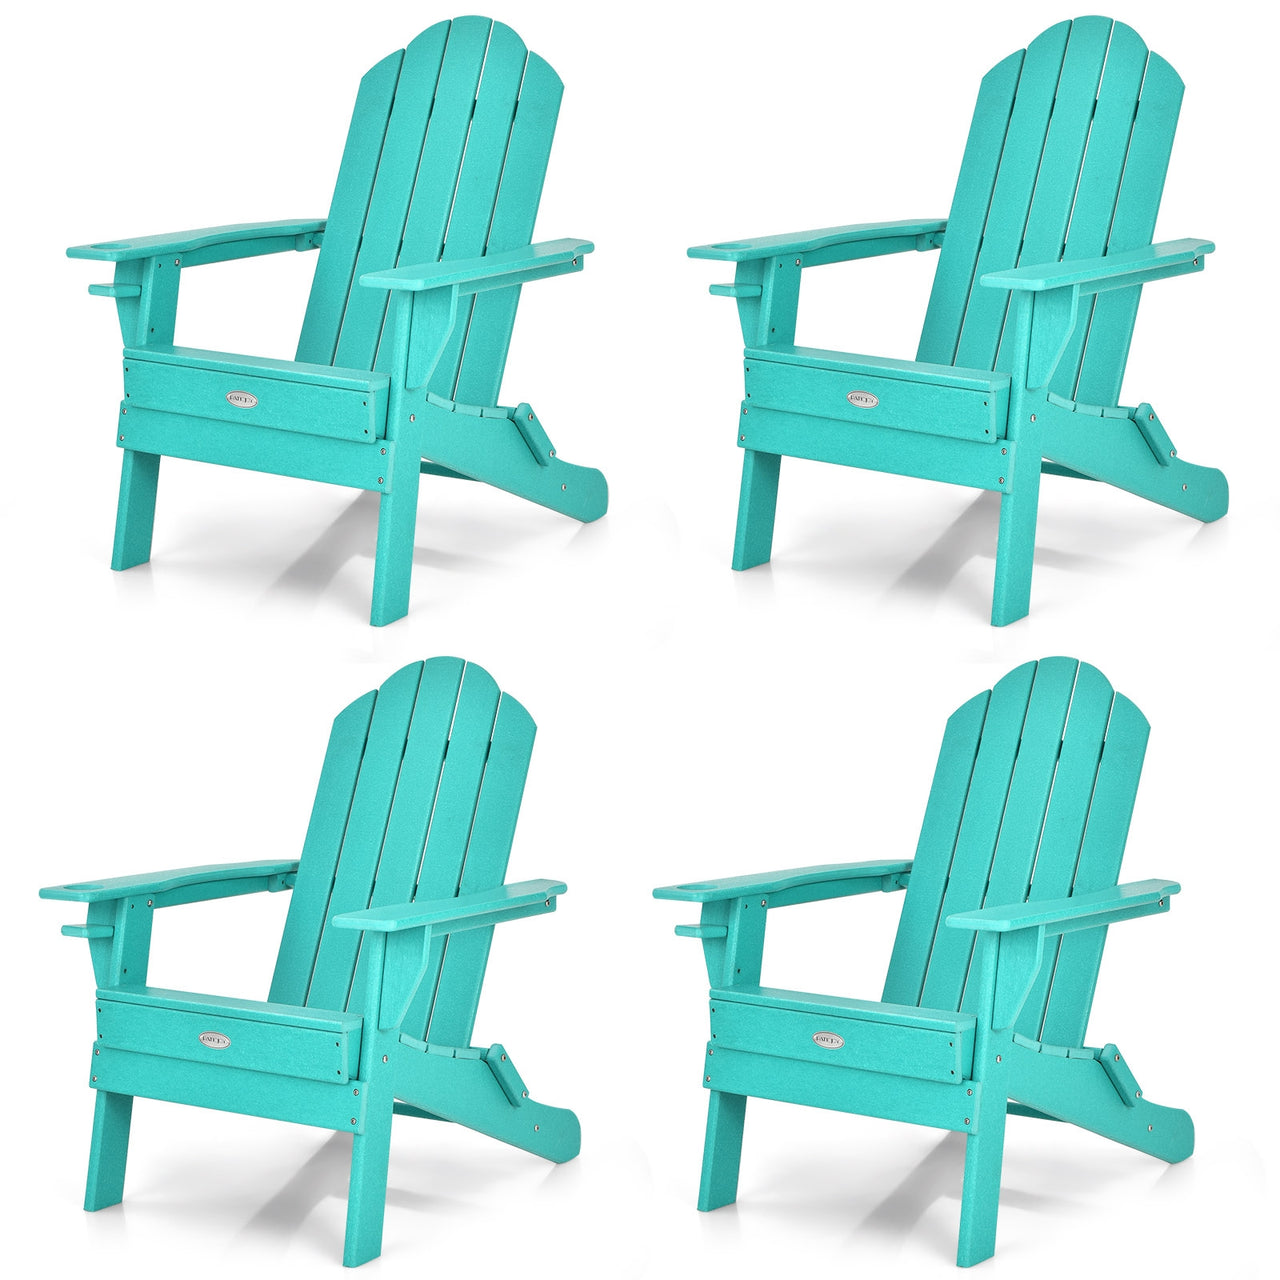 Foldable Weather Resistant Patio Chair with Built-in Cup Holder - Gallery View 9 of 11